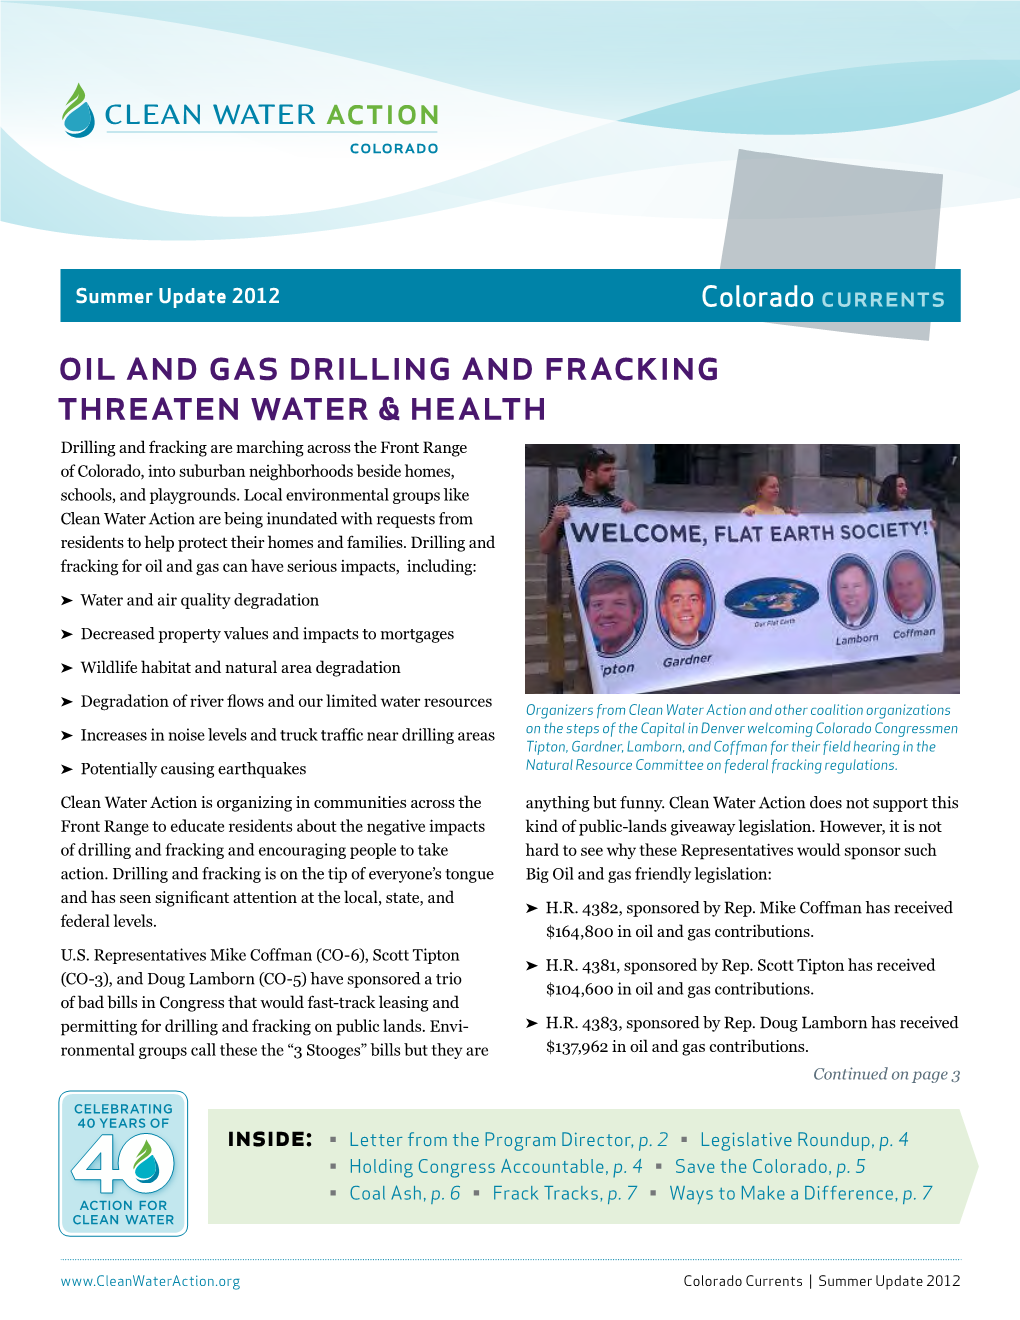 Oil and Gas Drilling and Fracking Threaten Water & Health